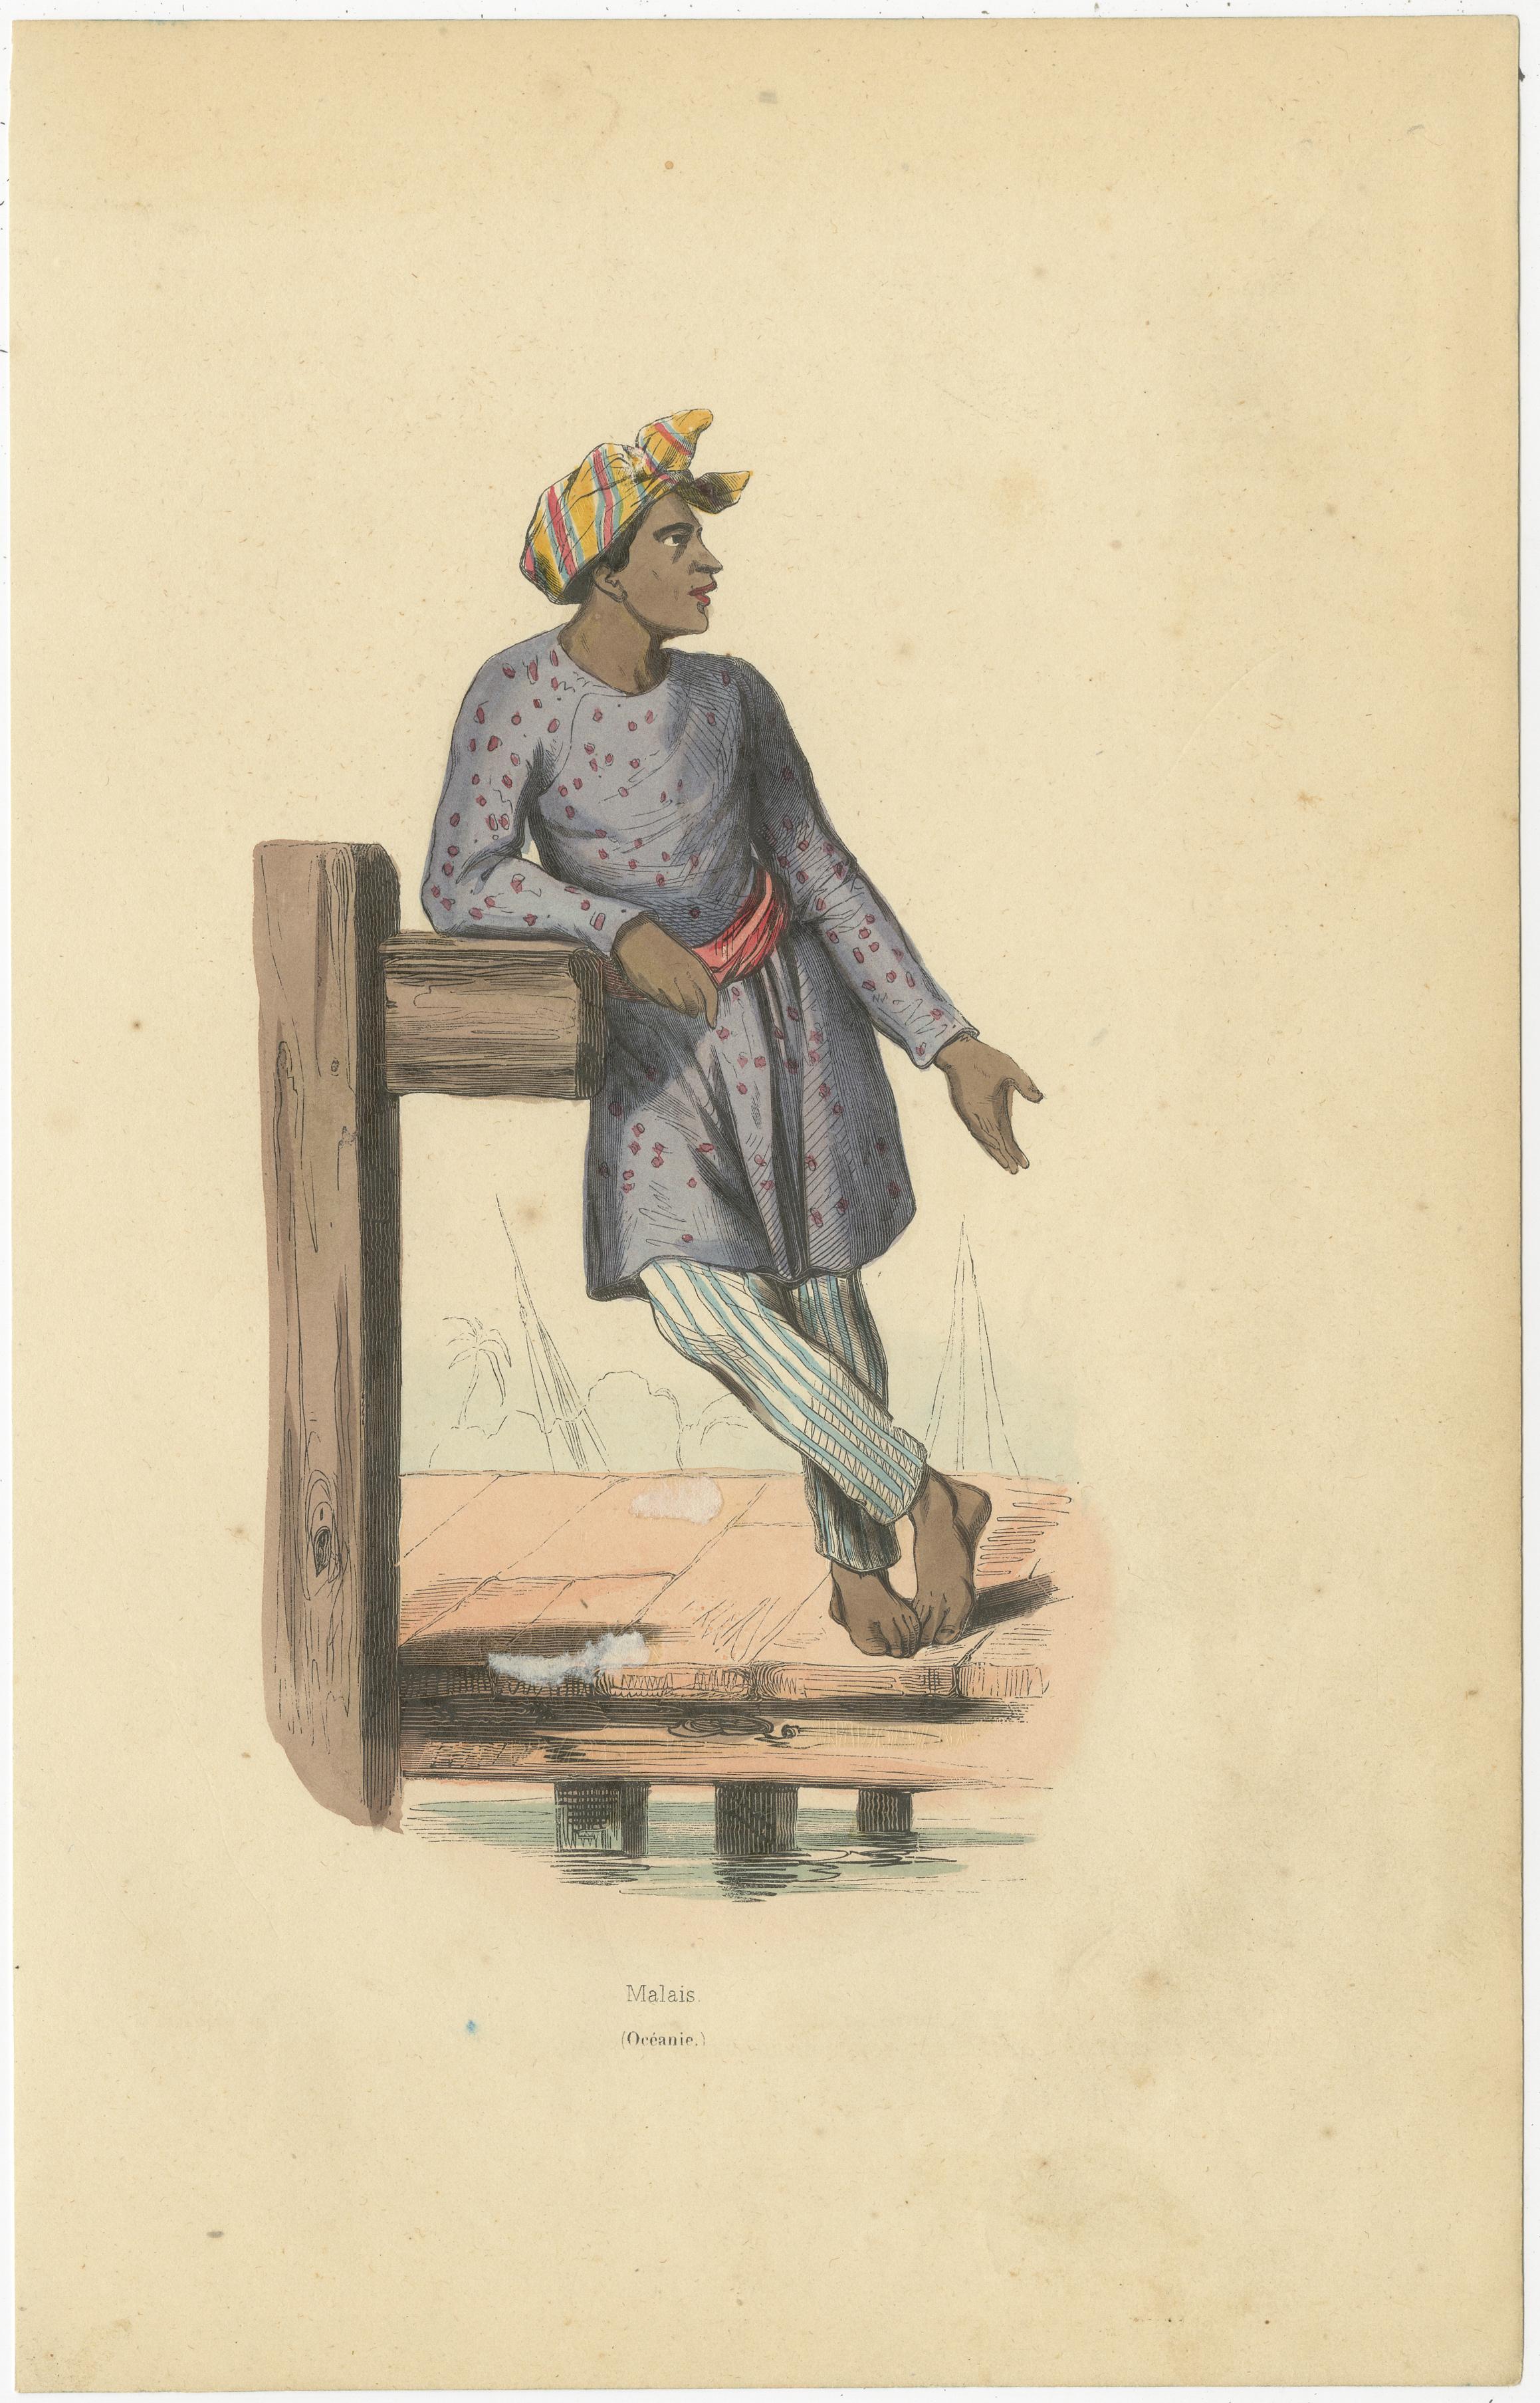 Antique print titled 'Malais (Océanie)'. Hand colored woodcut of a Malay man of Singapore. He wears a bandana, long-sleeved jacket, pants and belt.

Step into the vibrant world of cultural portrayal with the antique print titled 'Malais (Océanie)'.